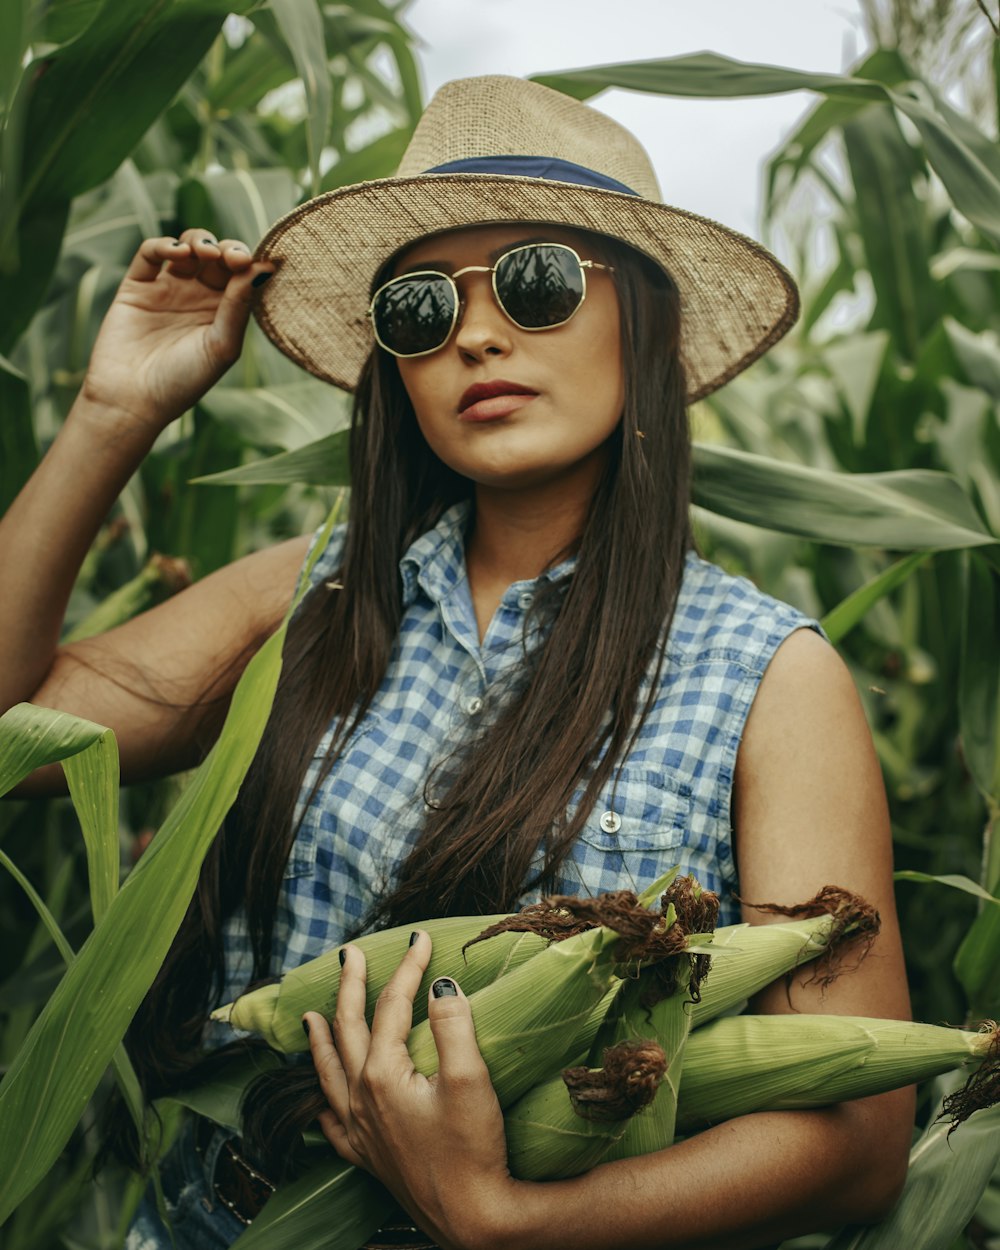 woman in blue and white plaid button up shirt and brown sun hat holding green banana